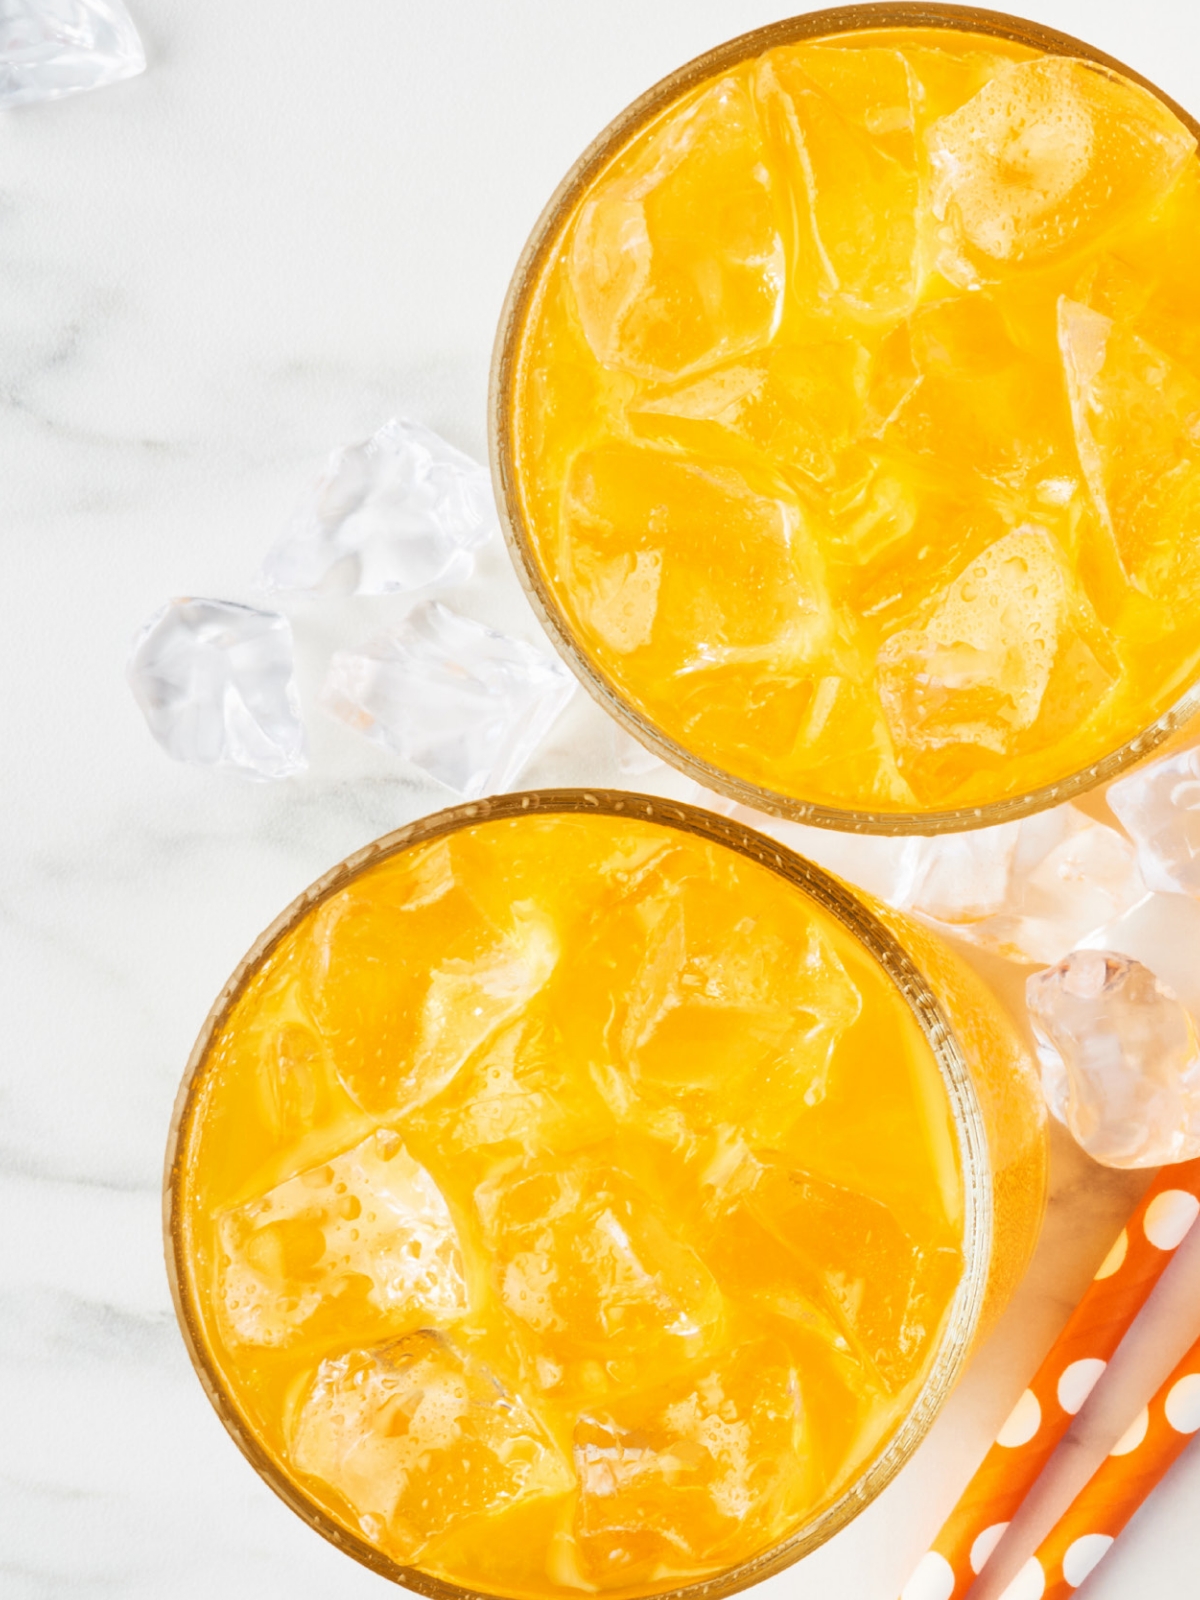 Orange beverages in glasses with ice